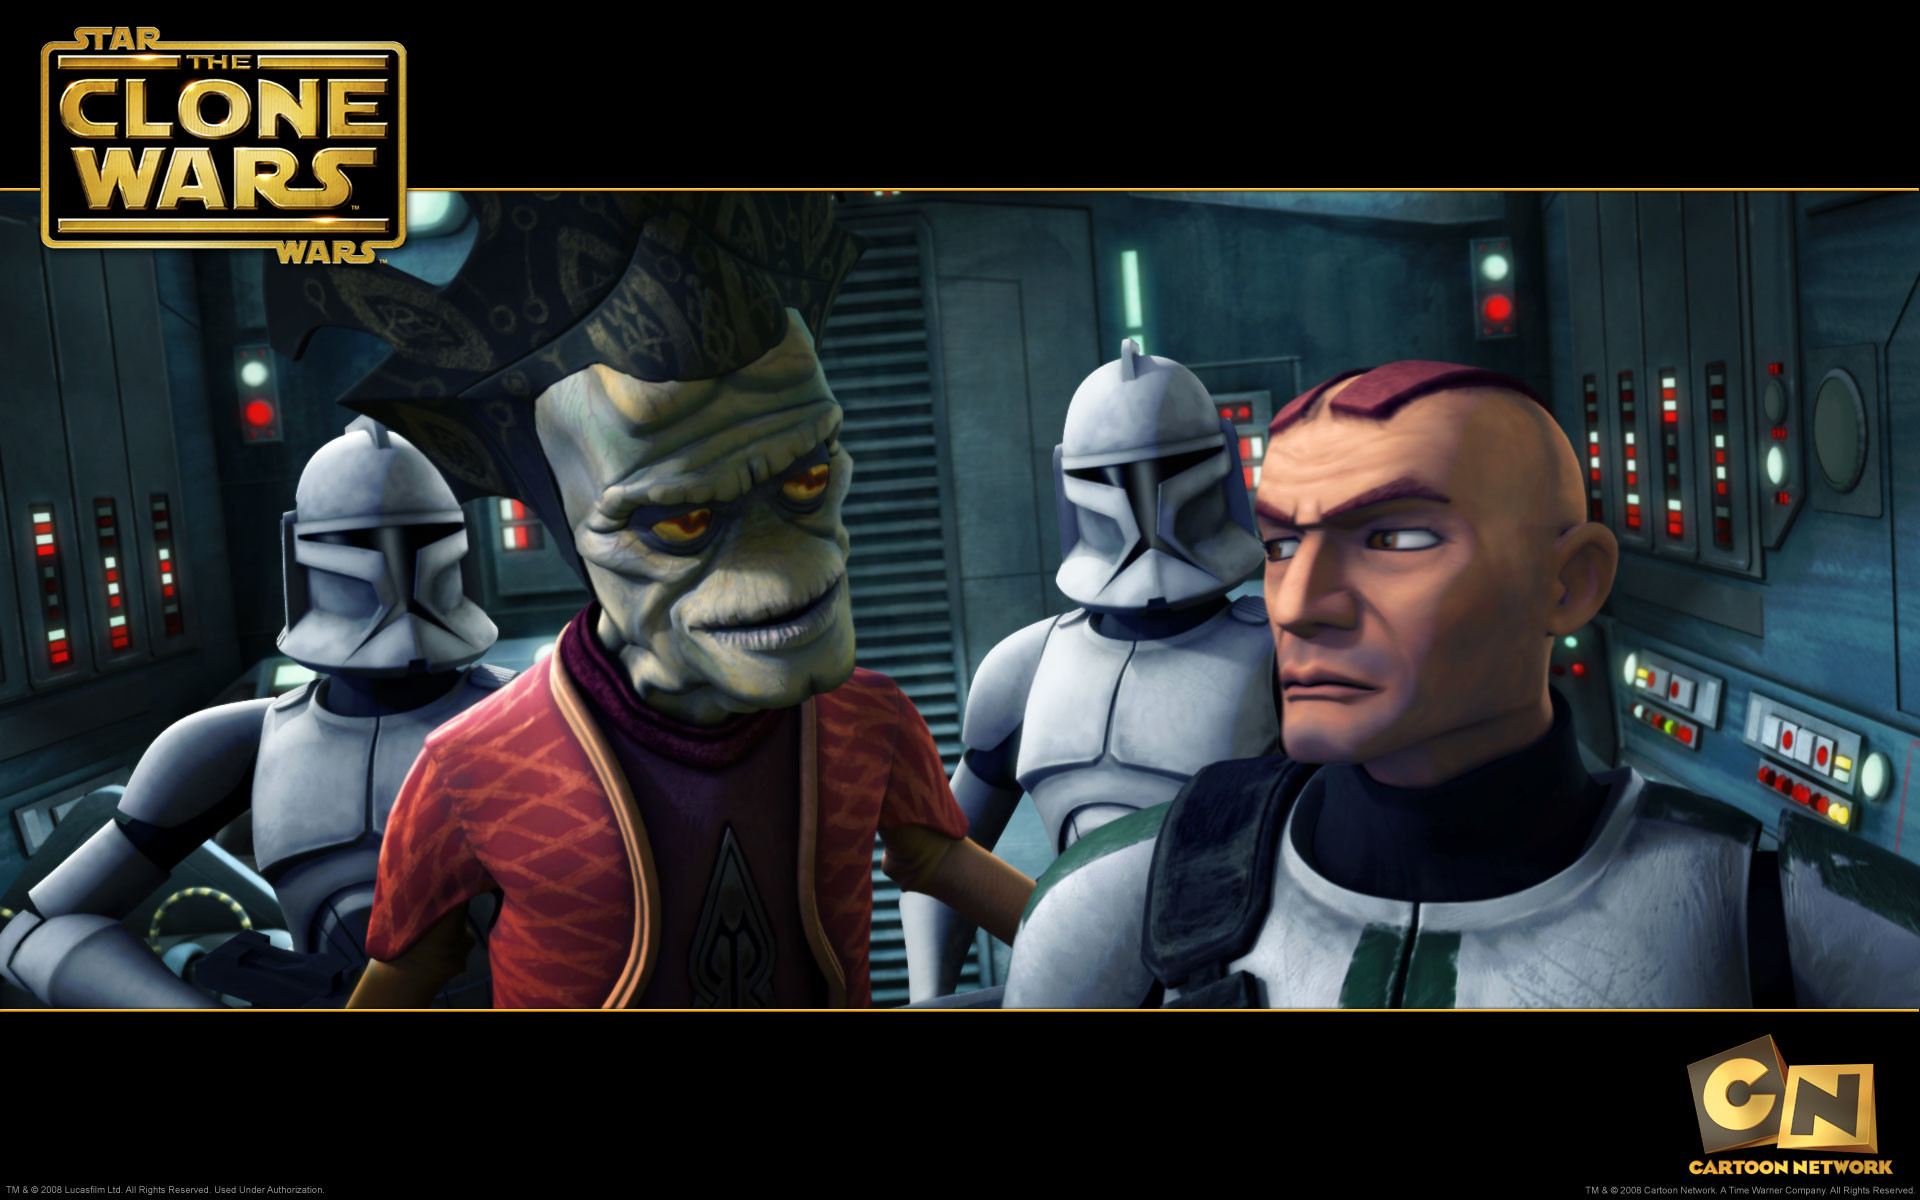 1920x1200 wallpaper photo of nute gunray and a group clones from the clone wars series